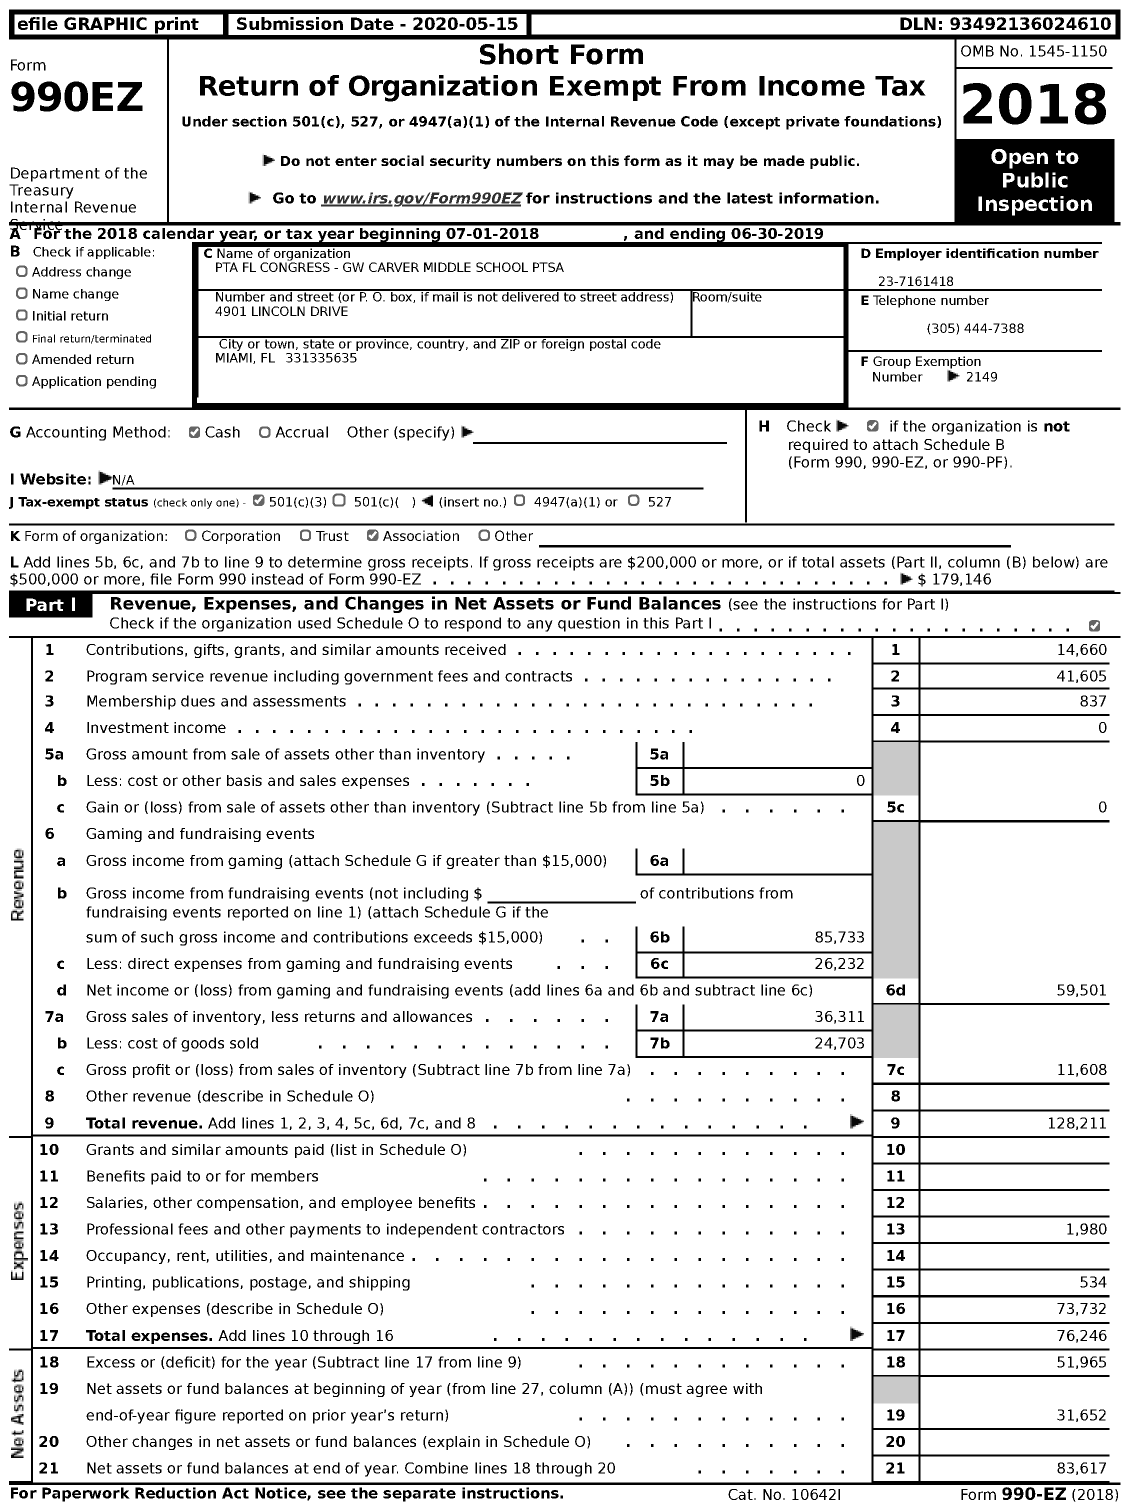 Image of first page of 2018 Form 990EZ for PTA Florida Congress - Carver Middle School Ptsa / Carver Middle School Ptsa